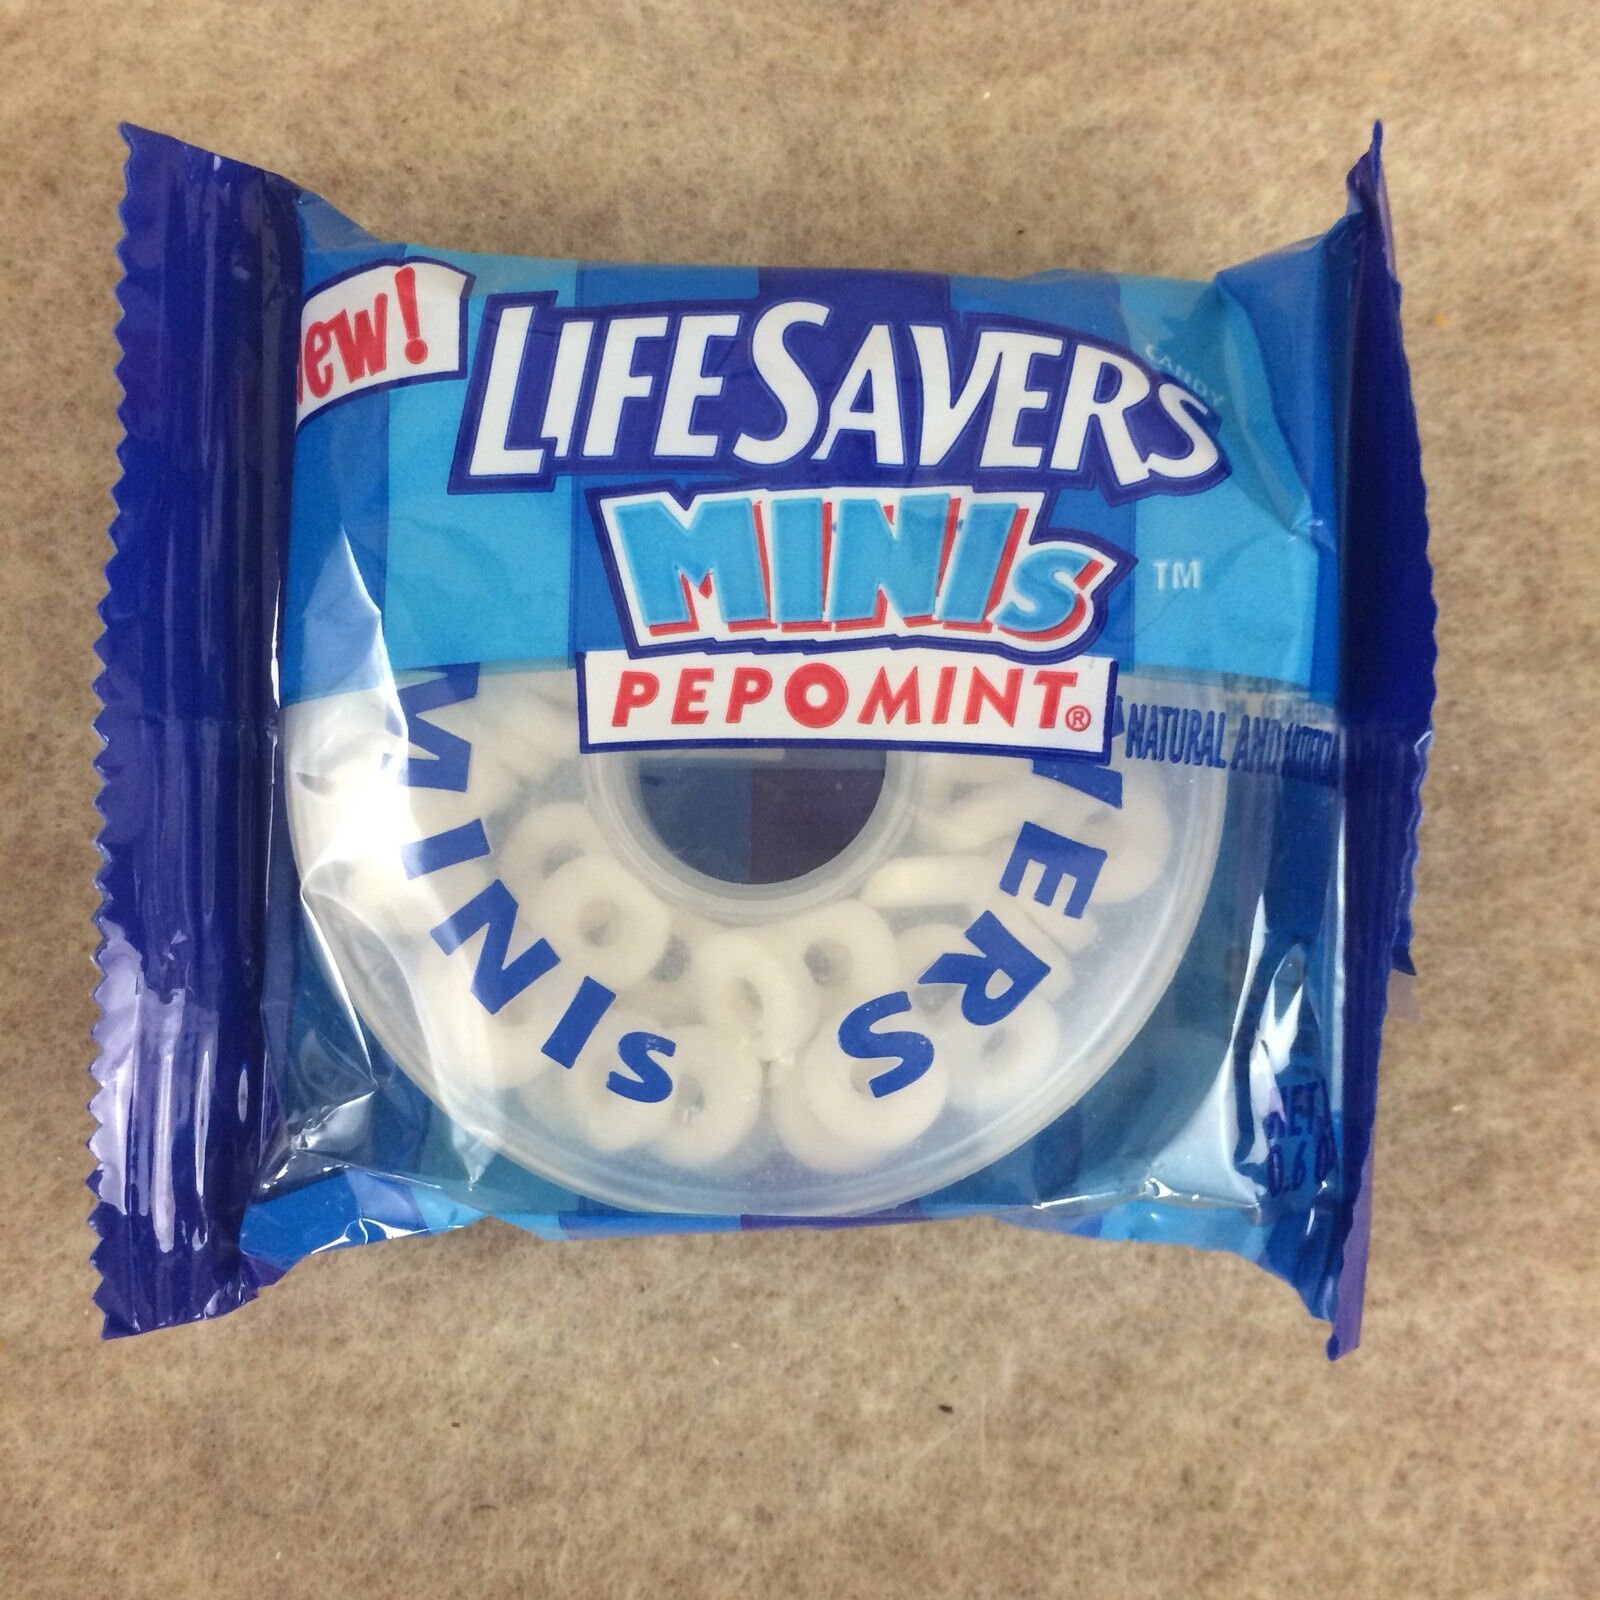 Lifesavers Minis Pepomint Vtg Expired Discontinued.